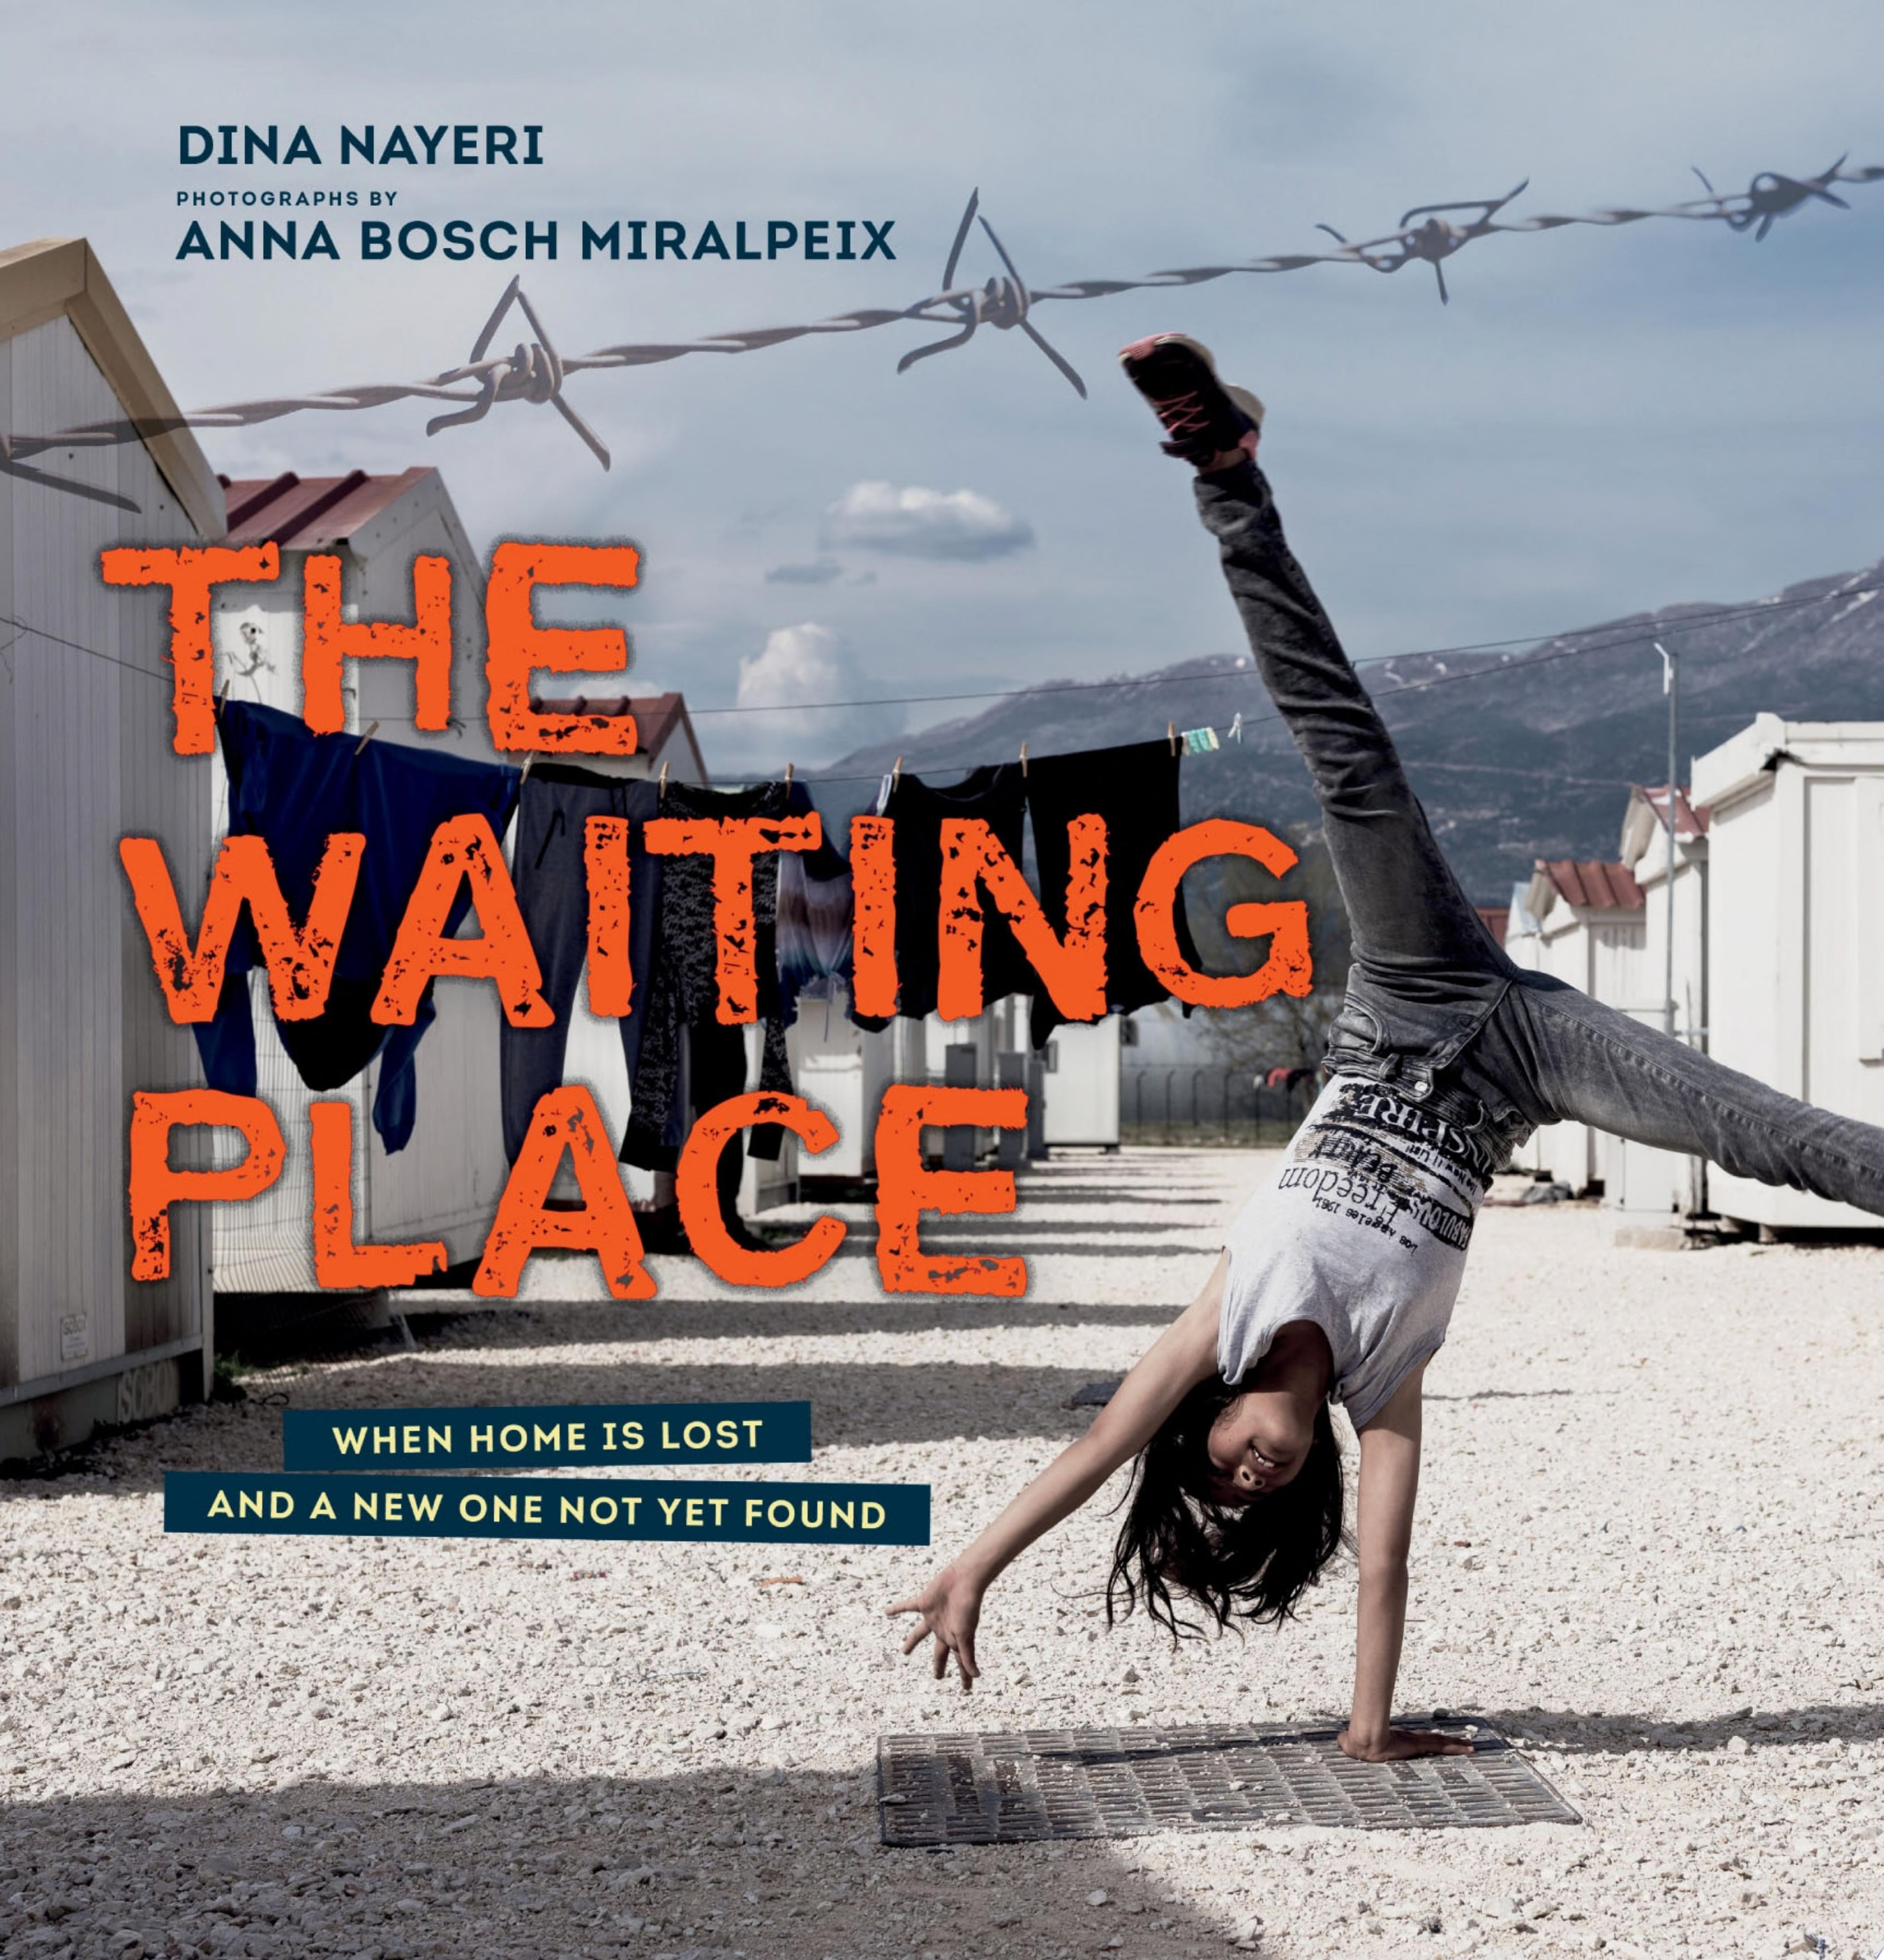 Image for "The Waiting Place: When Home Is Lost and a New One Not Yet Found"